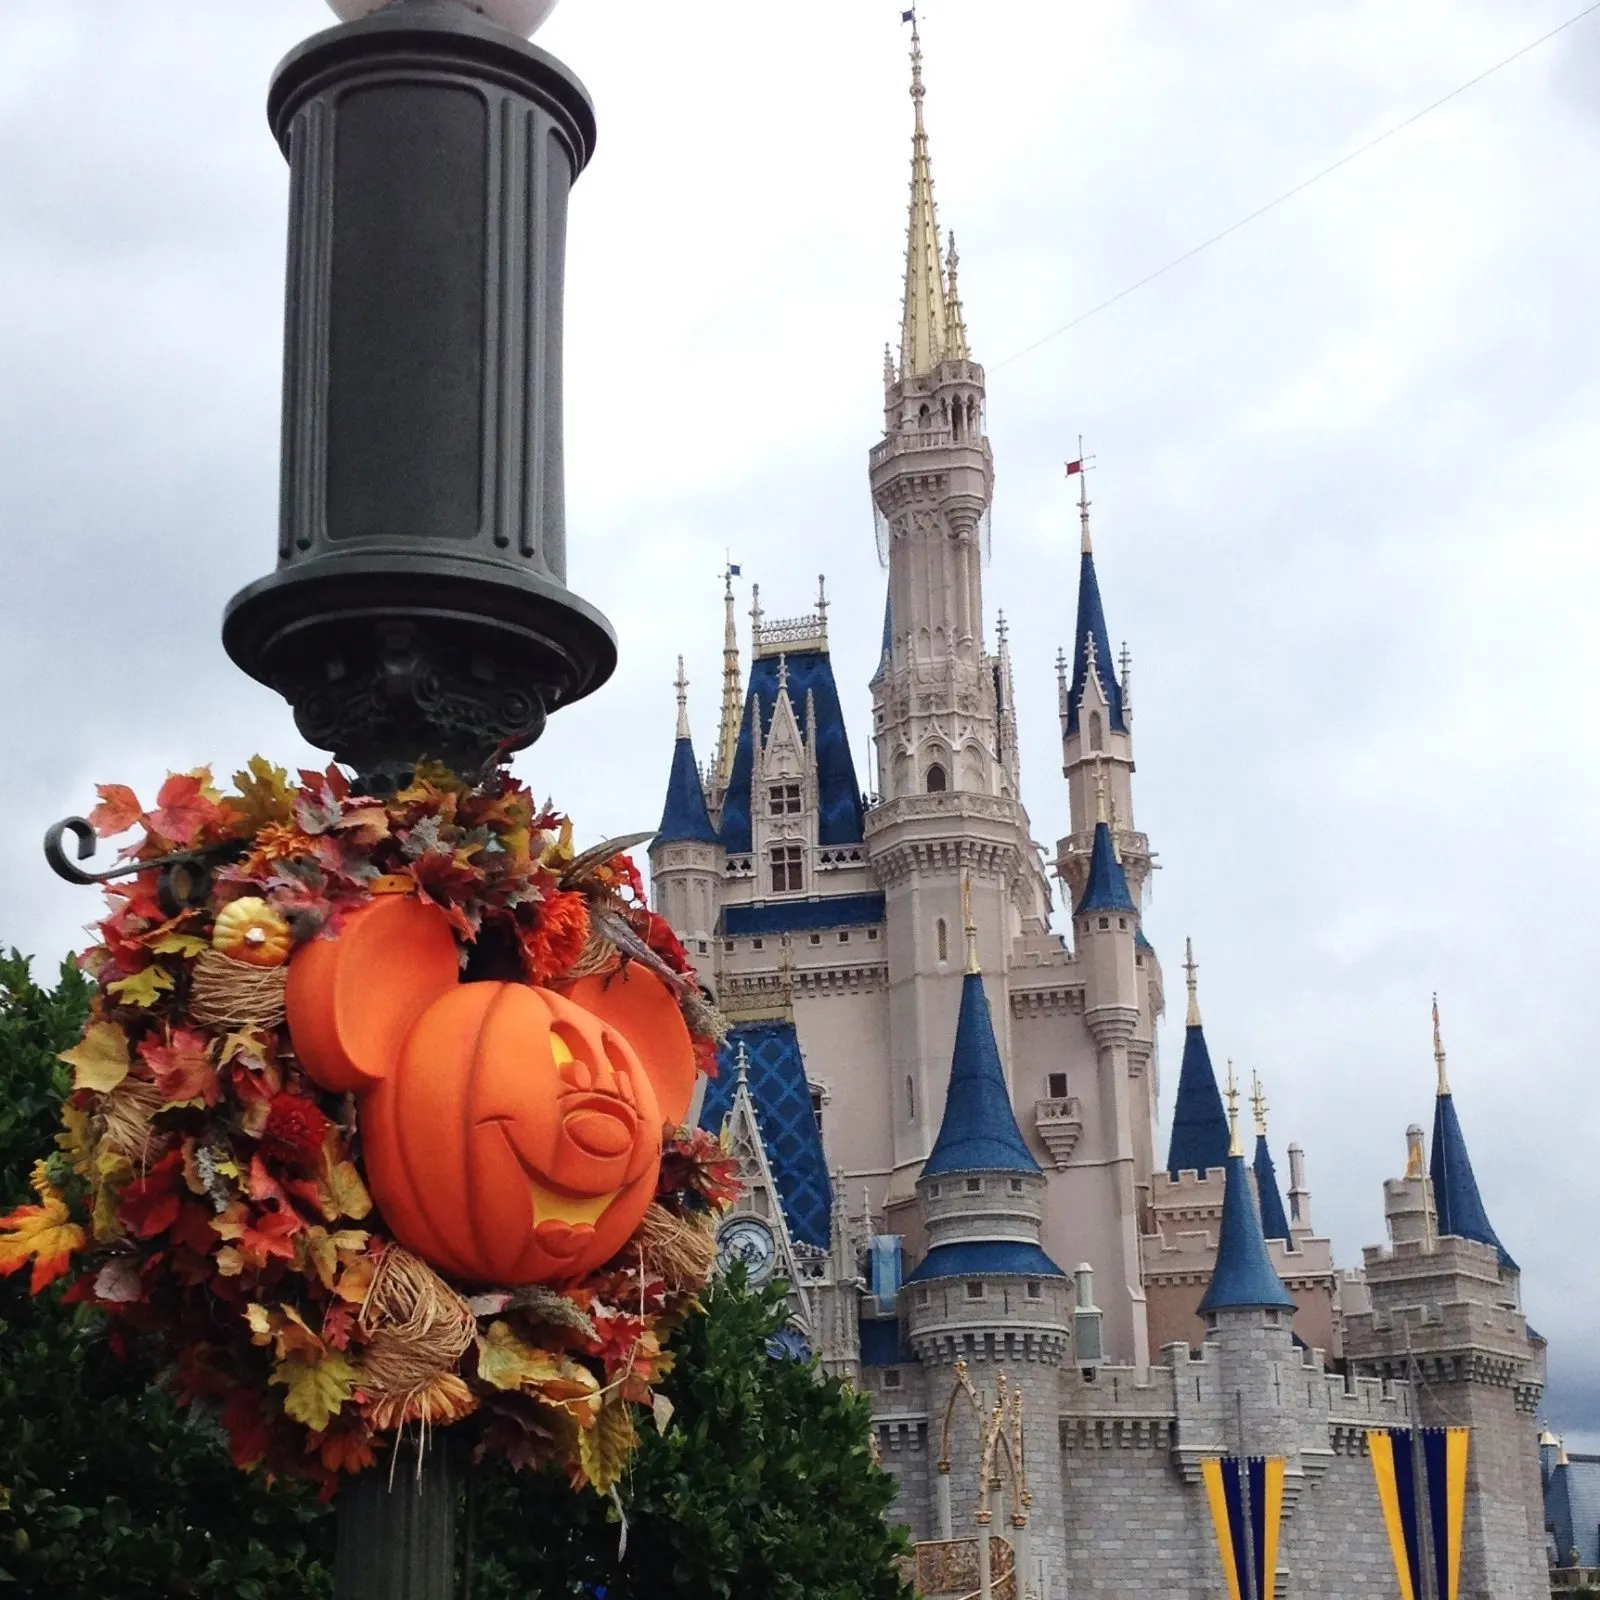 halloween decor on lamp post with cinderella's castle in the background